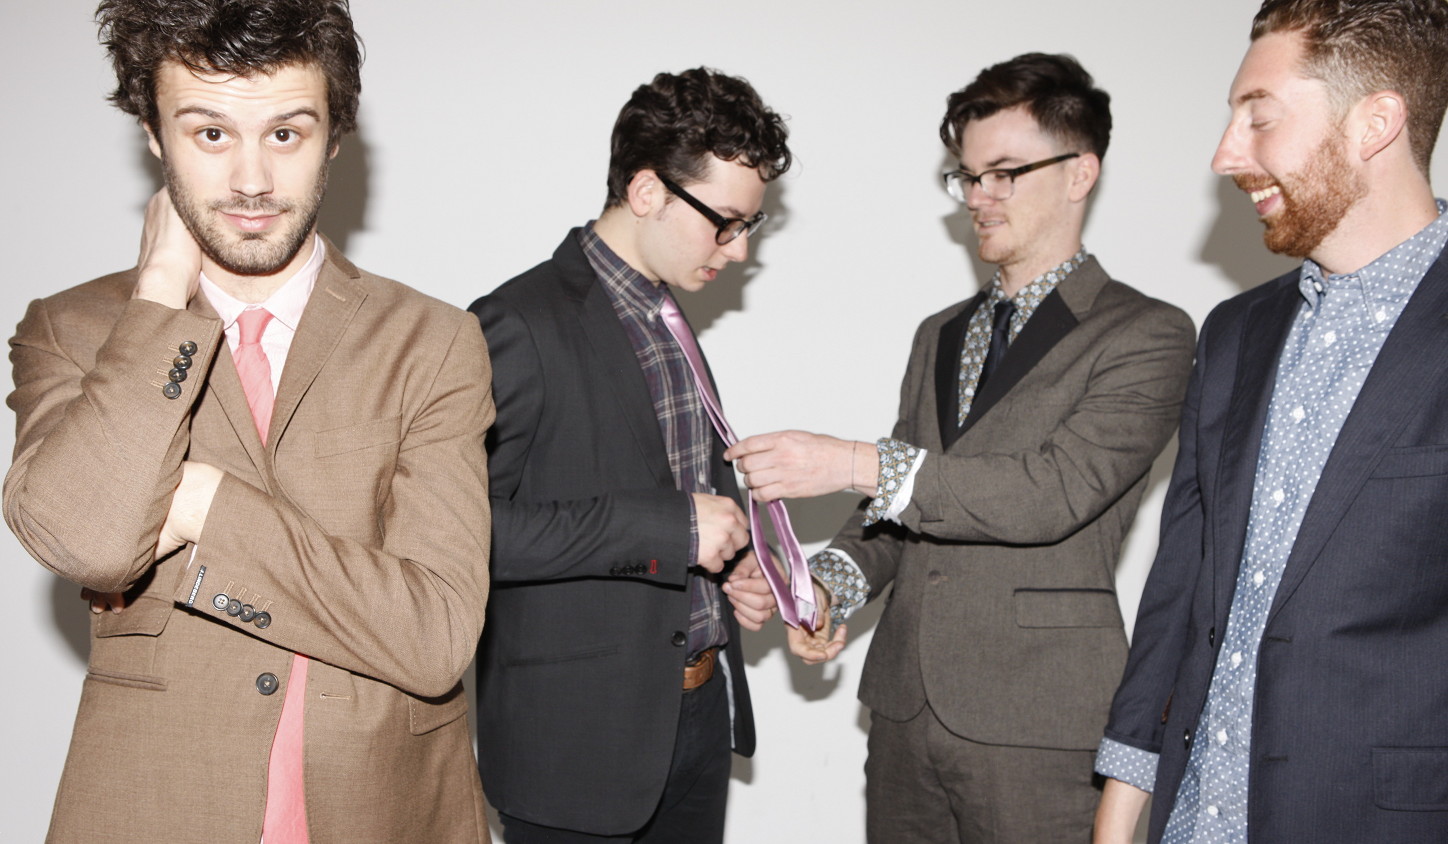 Группа passion Pit. Passion Pit игра. Passion Pit game all photos. Where i come from passion Pit.